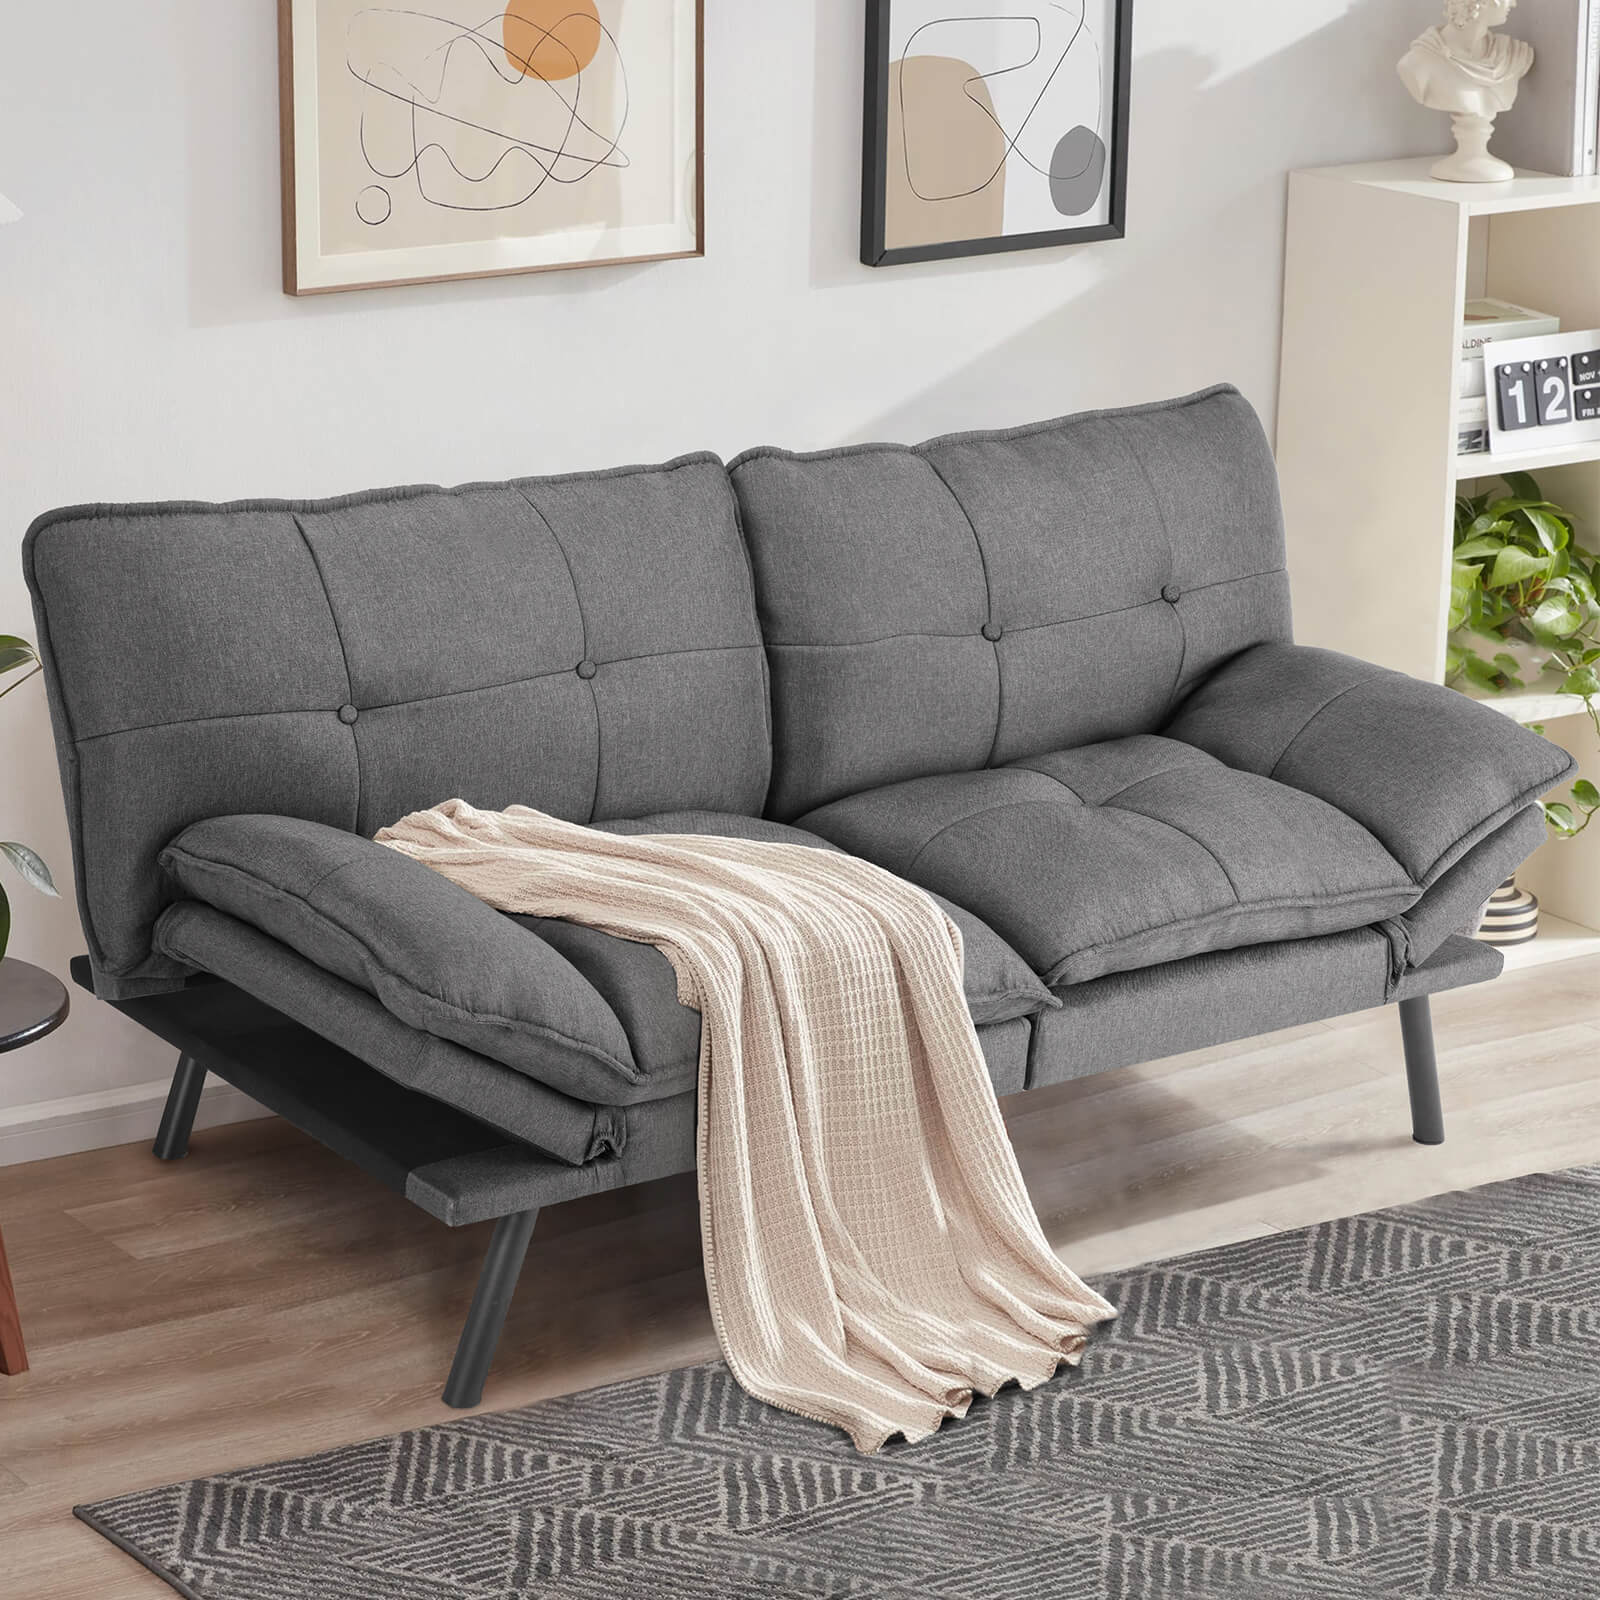 Sleeper Futon Sofa Couch Bed-Memory Foam Couch, Convertible Living Room Couch, Apartment, Studio, Office, Meeting, Living Room